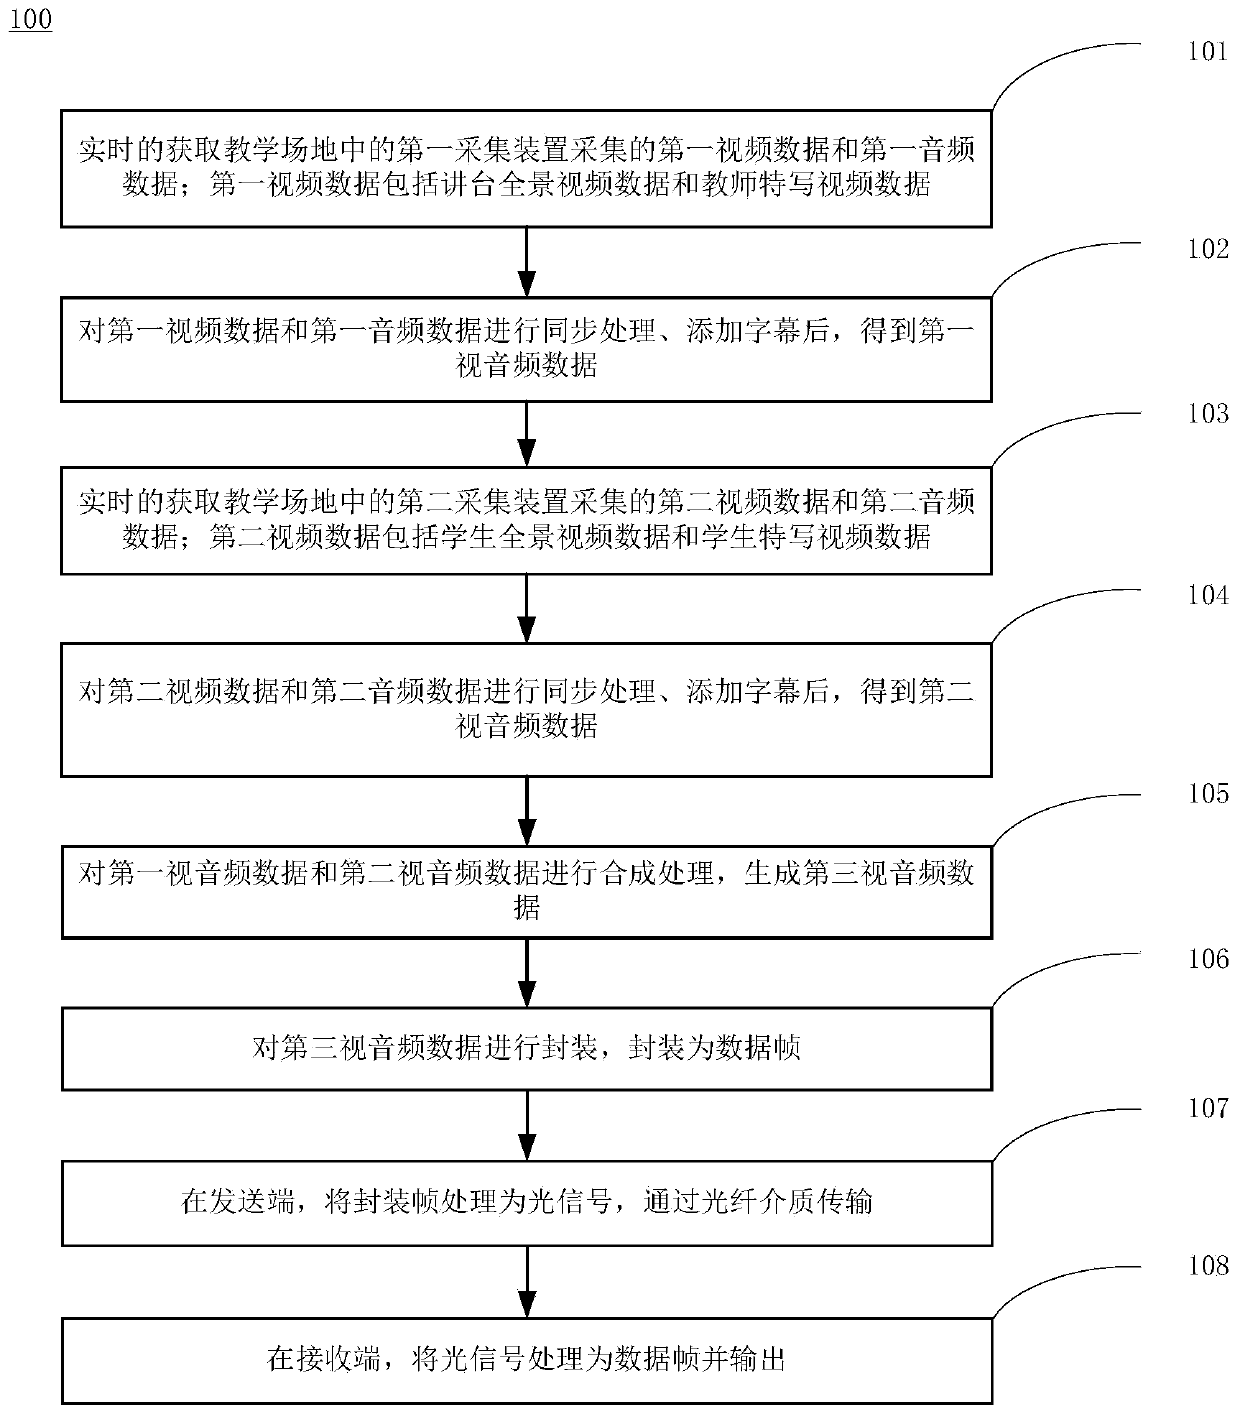 Full-high-definition recording and broadcasting method